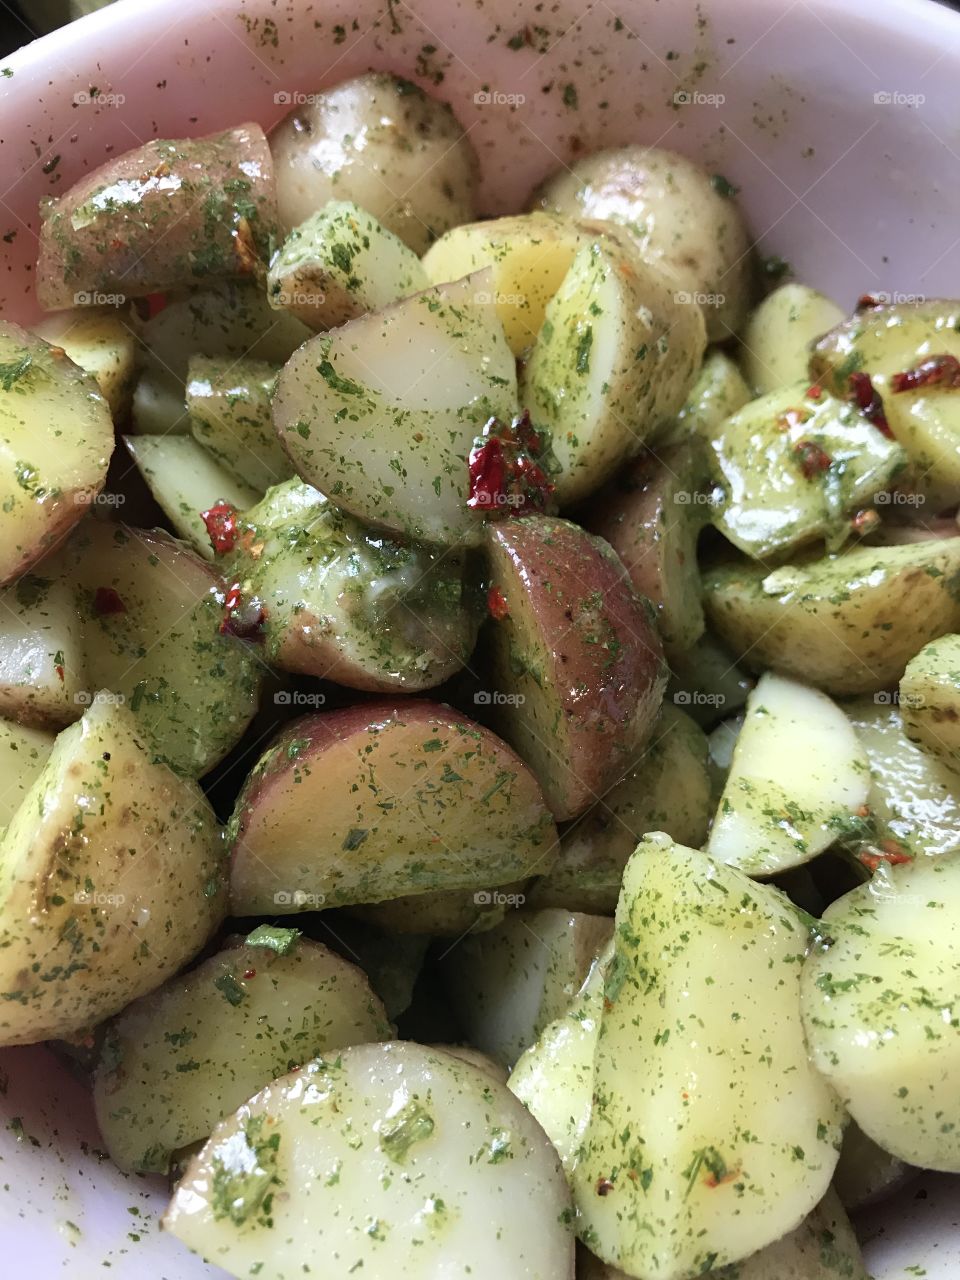 Red Potato Salad with herbs. Flavorful and tasty!